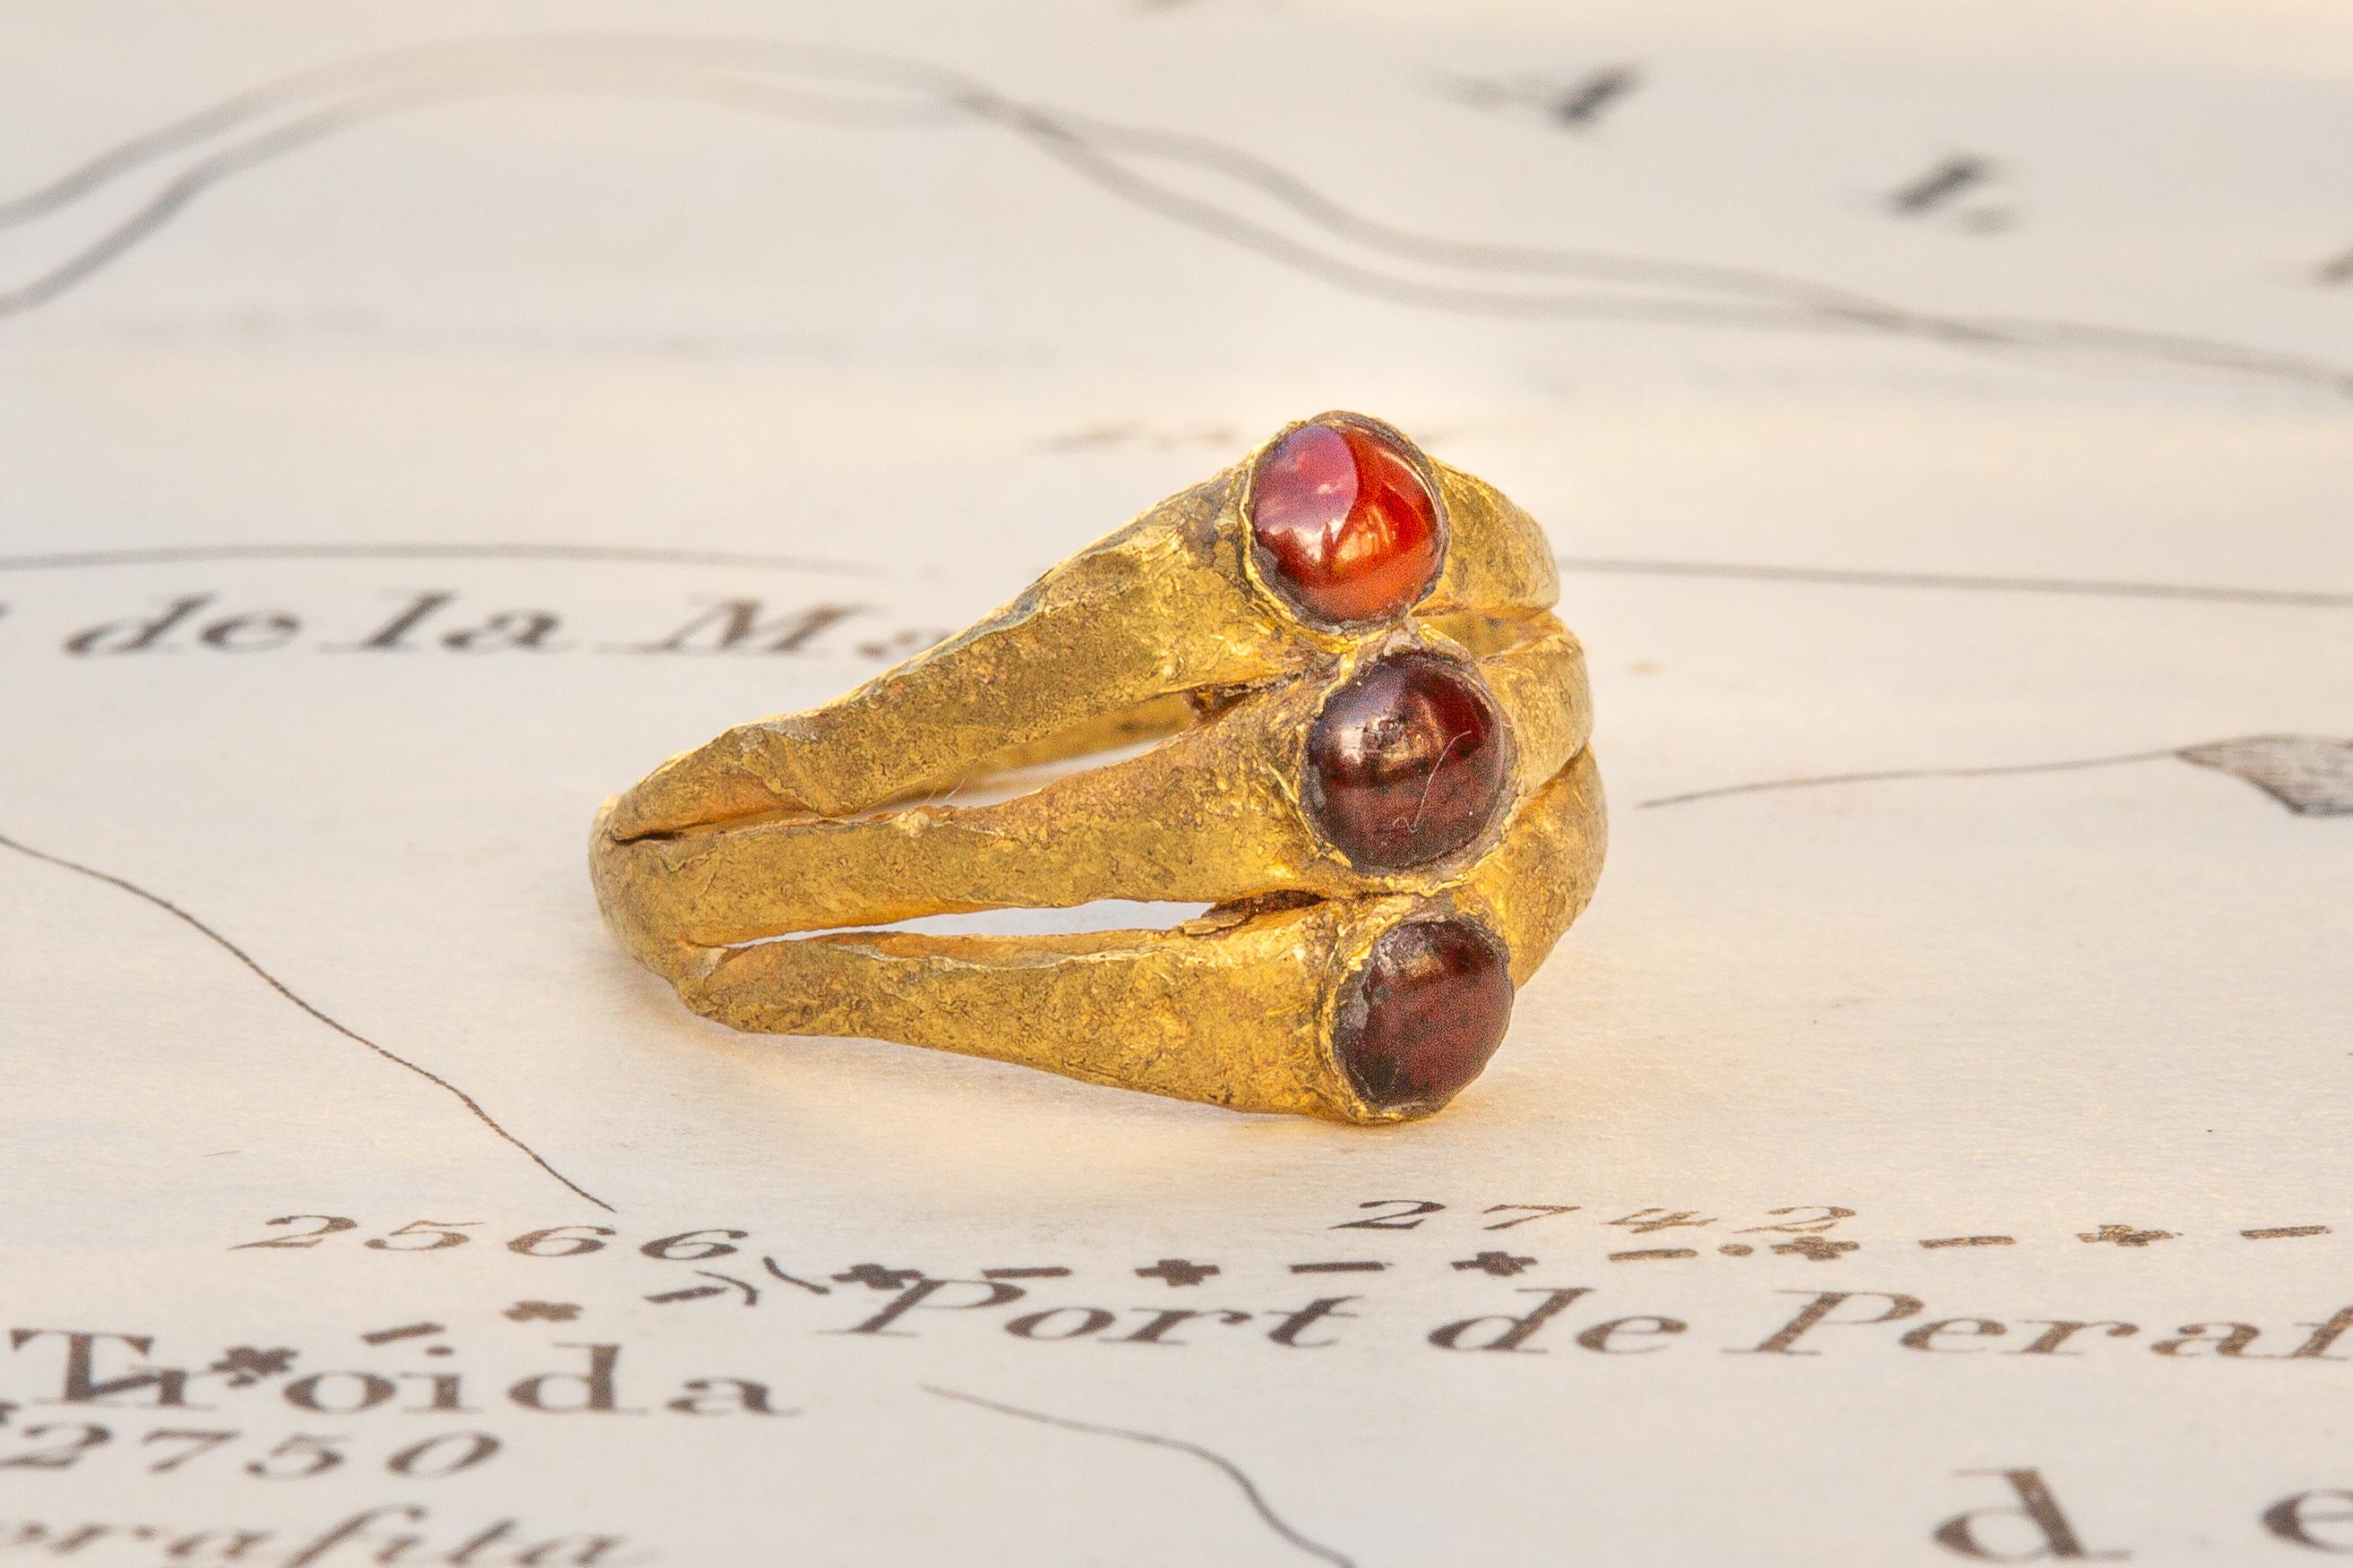 A beautiful and scarce example of a Late Roman triple-layered ring set with garnet cabochons, circa 3rd century AD. The flat band is made from a thick hammered sheet of high karat gold and trifurcates into three flat gold bands at the bezel, each